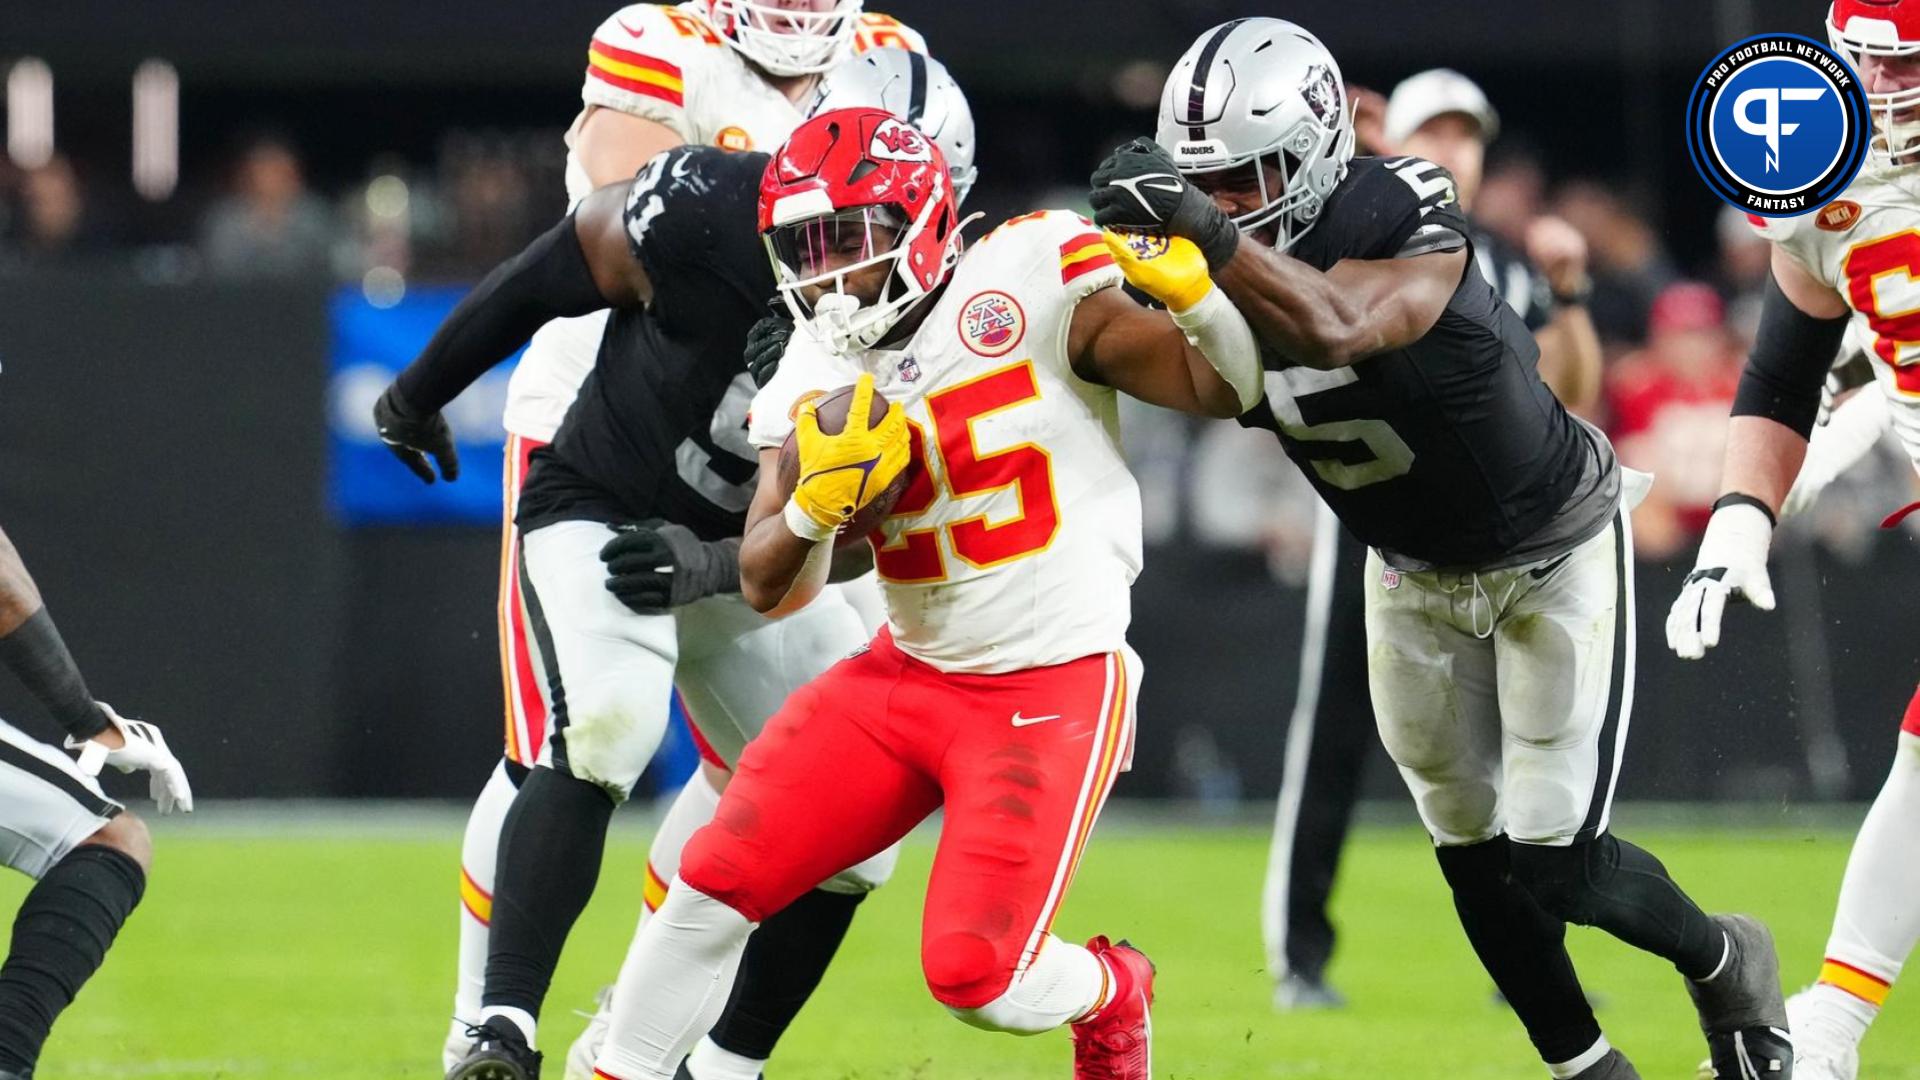 Kansas City Chiefs running back Clyde Edwards-Helaire (25) is tackled by Las Vegas Raiders linebacker Divine Deablo (5) during the third quarter at Allegiant Stadium.